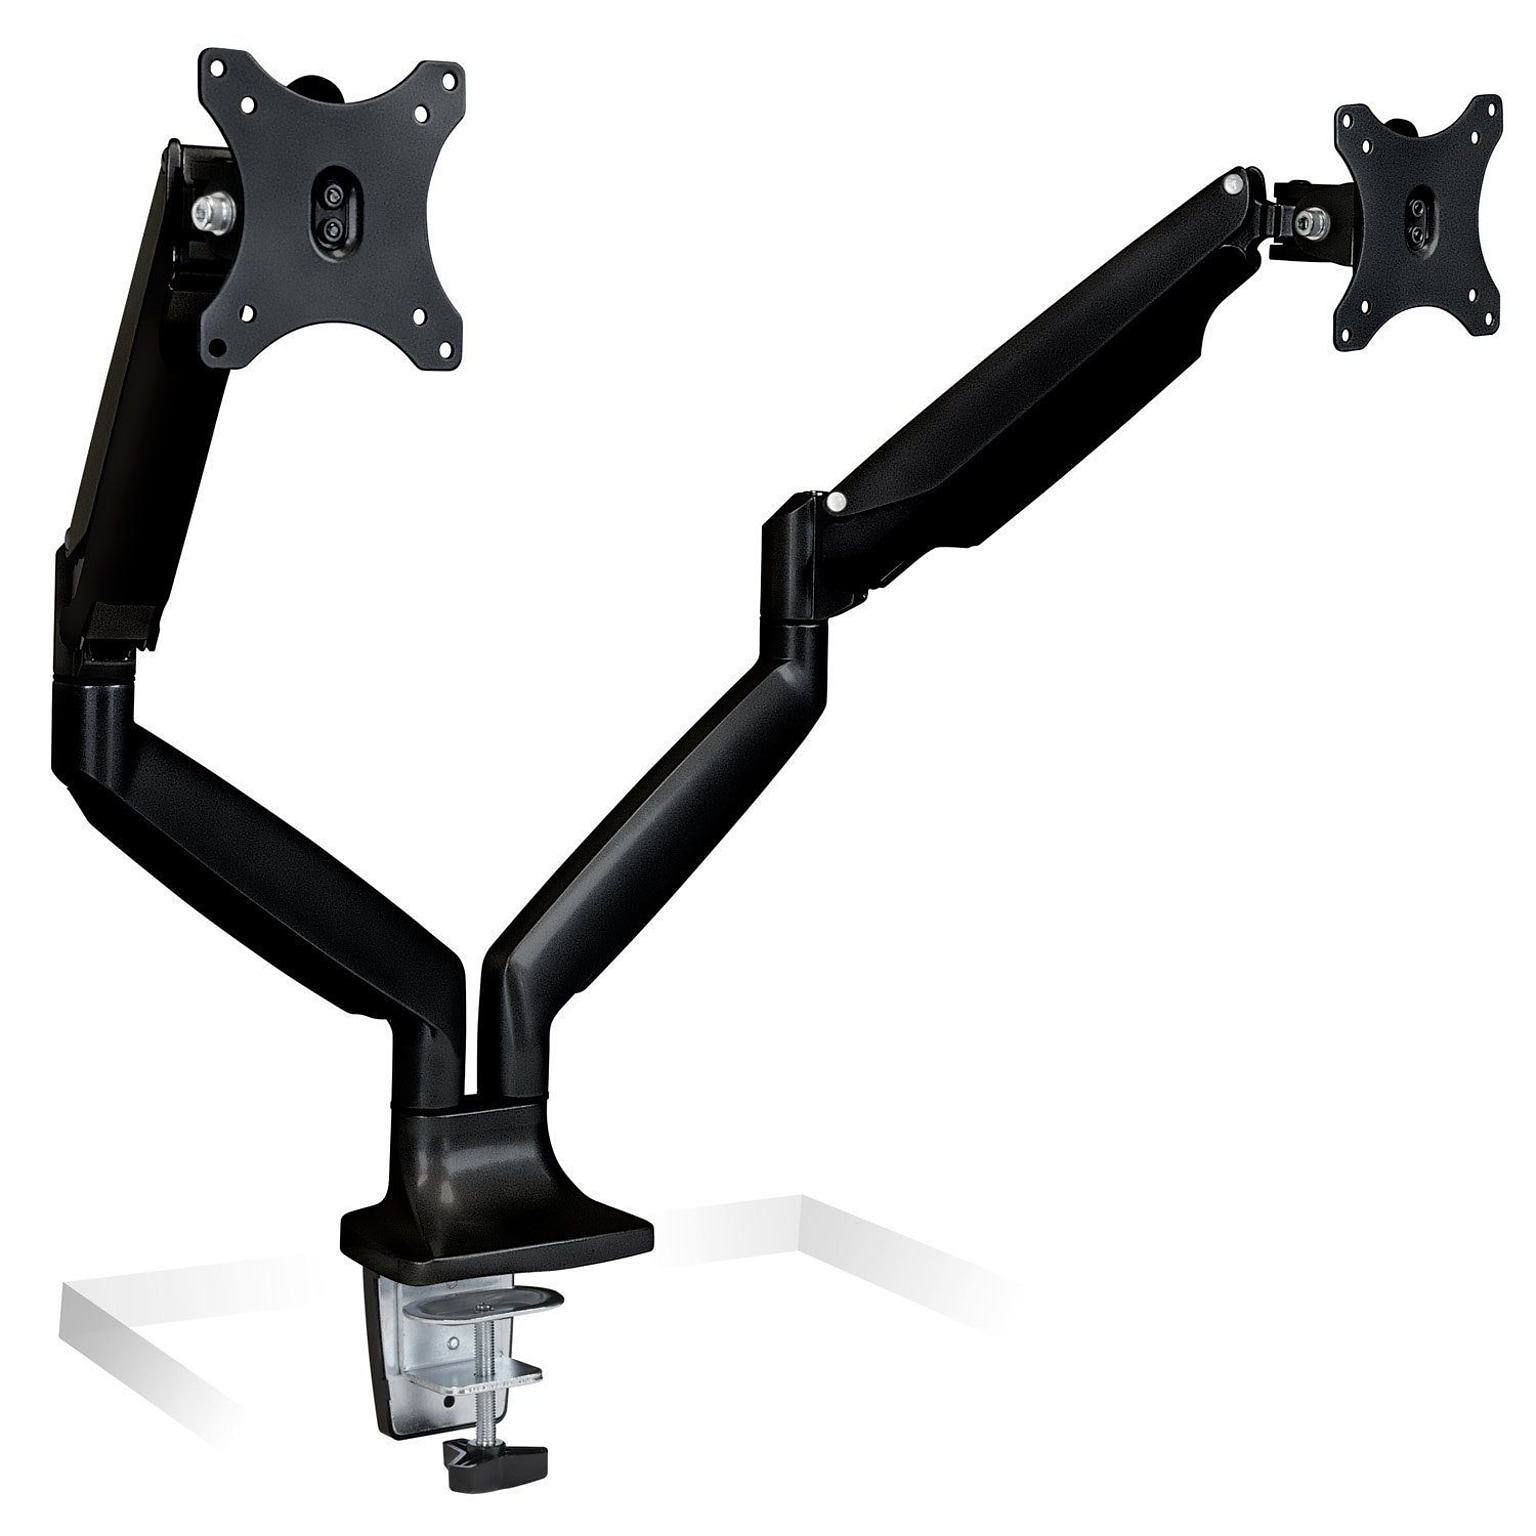 Mount-It! Height Adjustable Dual Monitor Desk Mount Arms for 13 to 32 Monitors, Black (MI-1772-BLACK)